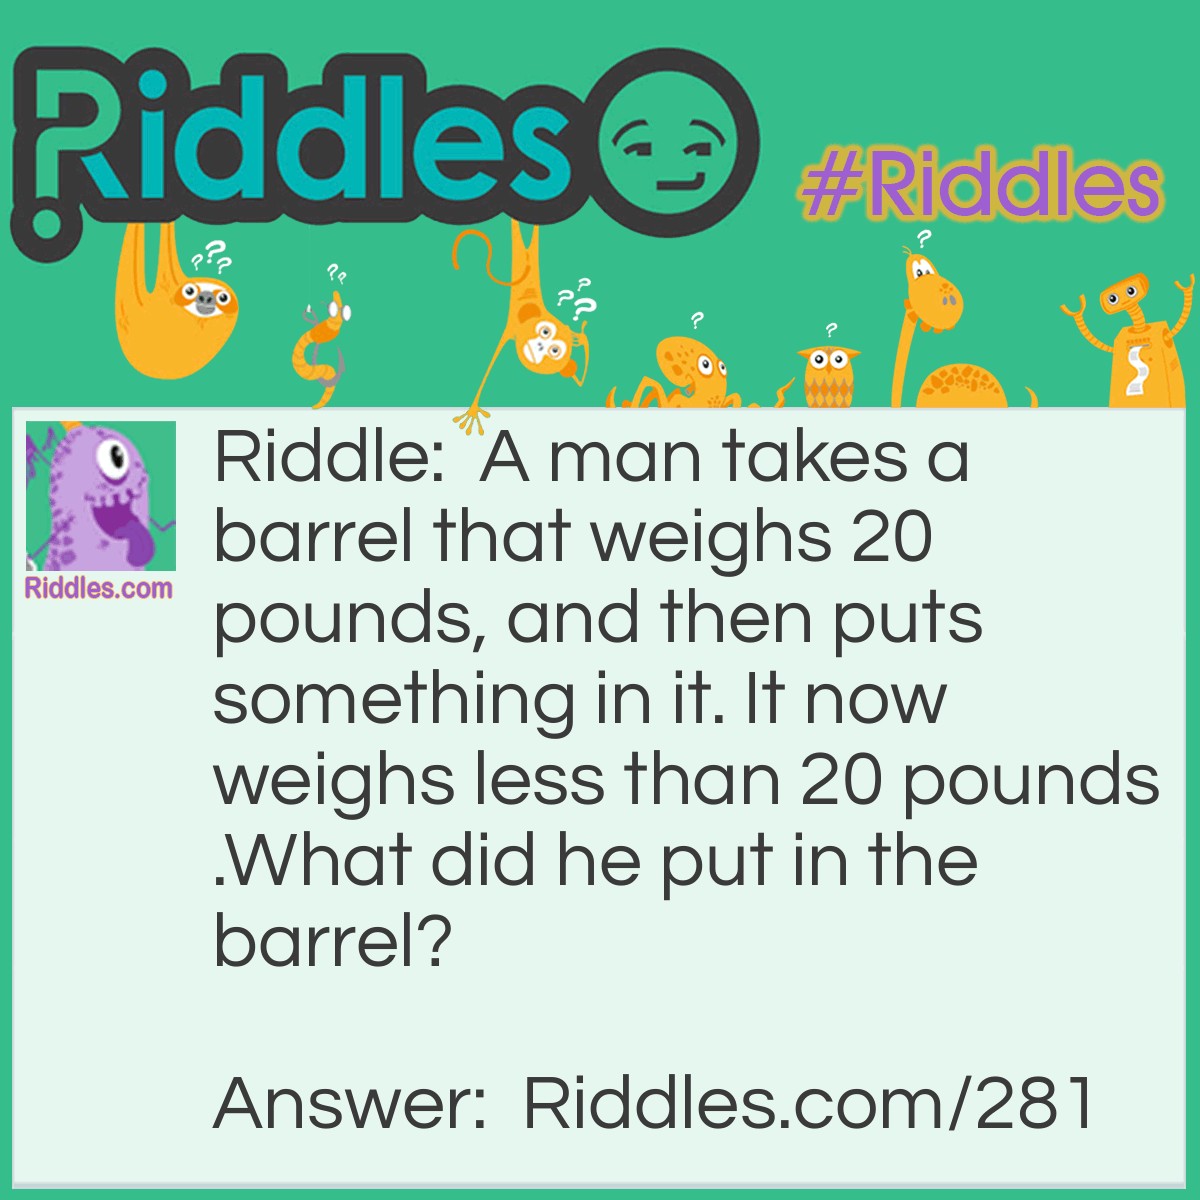 Riddle: A man takes a barrel that weighs 20 pounds and then puts something in it. It now weighs less than 20 pounds. What did he put in the barrel? Answer: He put a hole in the barrel to make it weigh less.